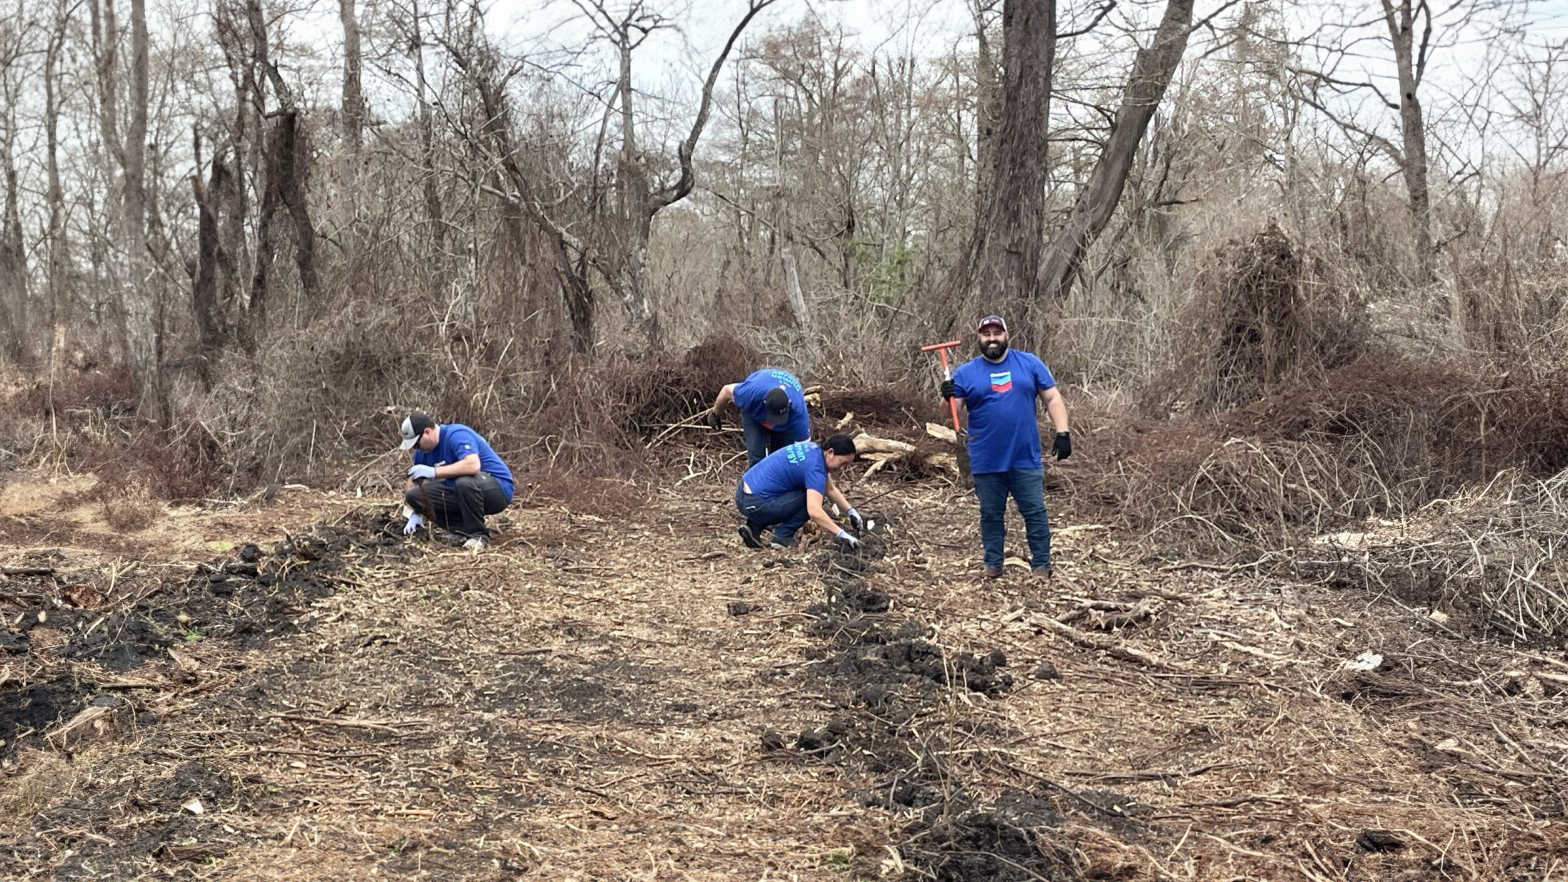 Chevron volunteers planted seedlings and trees at the Woodlands Conservancy to help restore an area damaged by recent hurricanes.